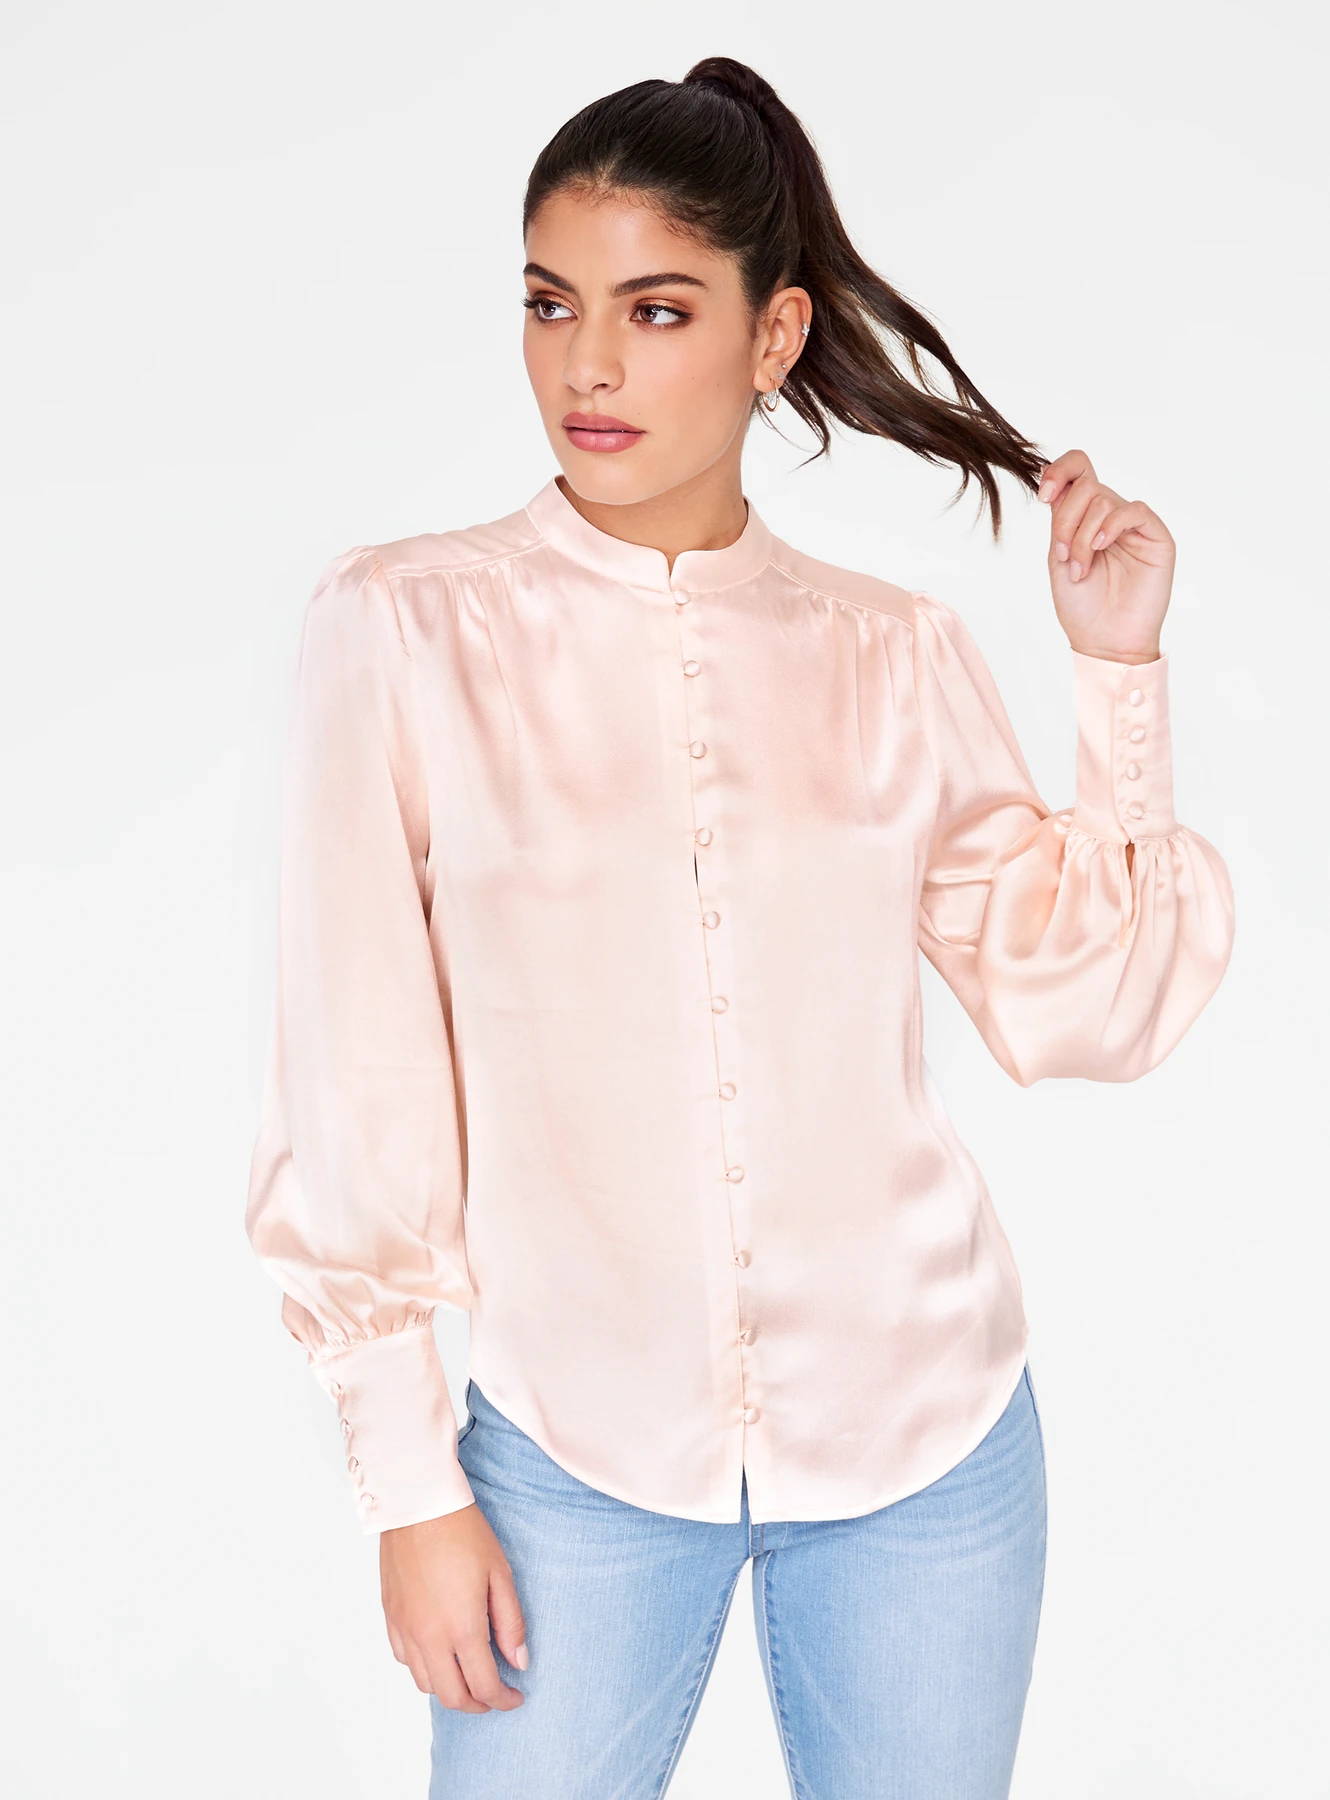 Mandarin Collar Button Up Top in Ivory 